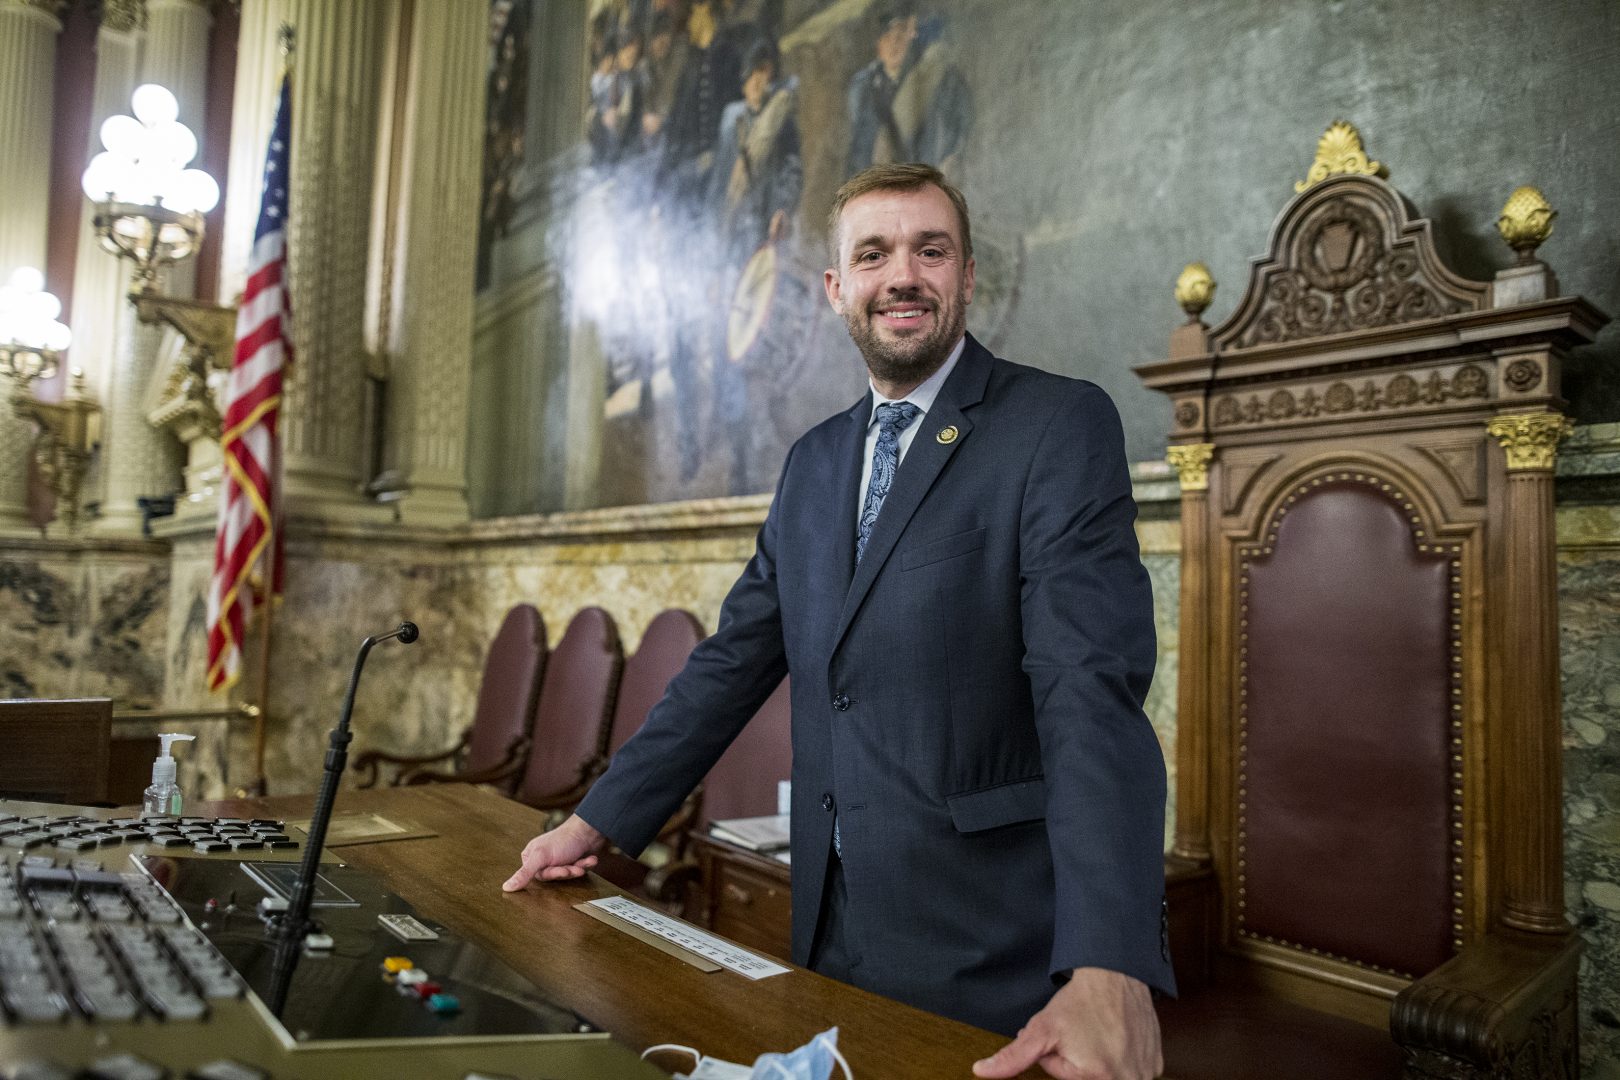 New House Speaker Bryan Cutler, who just took the top post in the state House of Representatives 10 days ago. Cutler is a Lancaster County Republican and the first speaker from Lancaster County in many years. July 1, 2020.